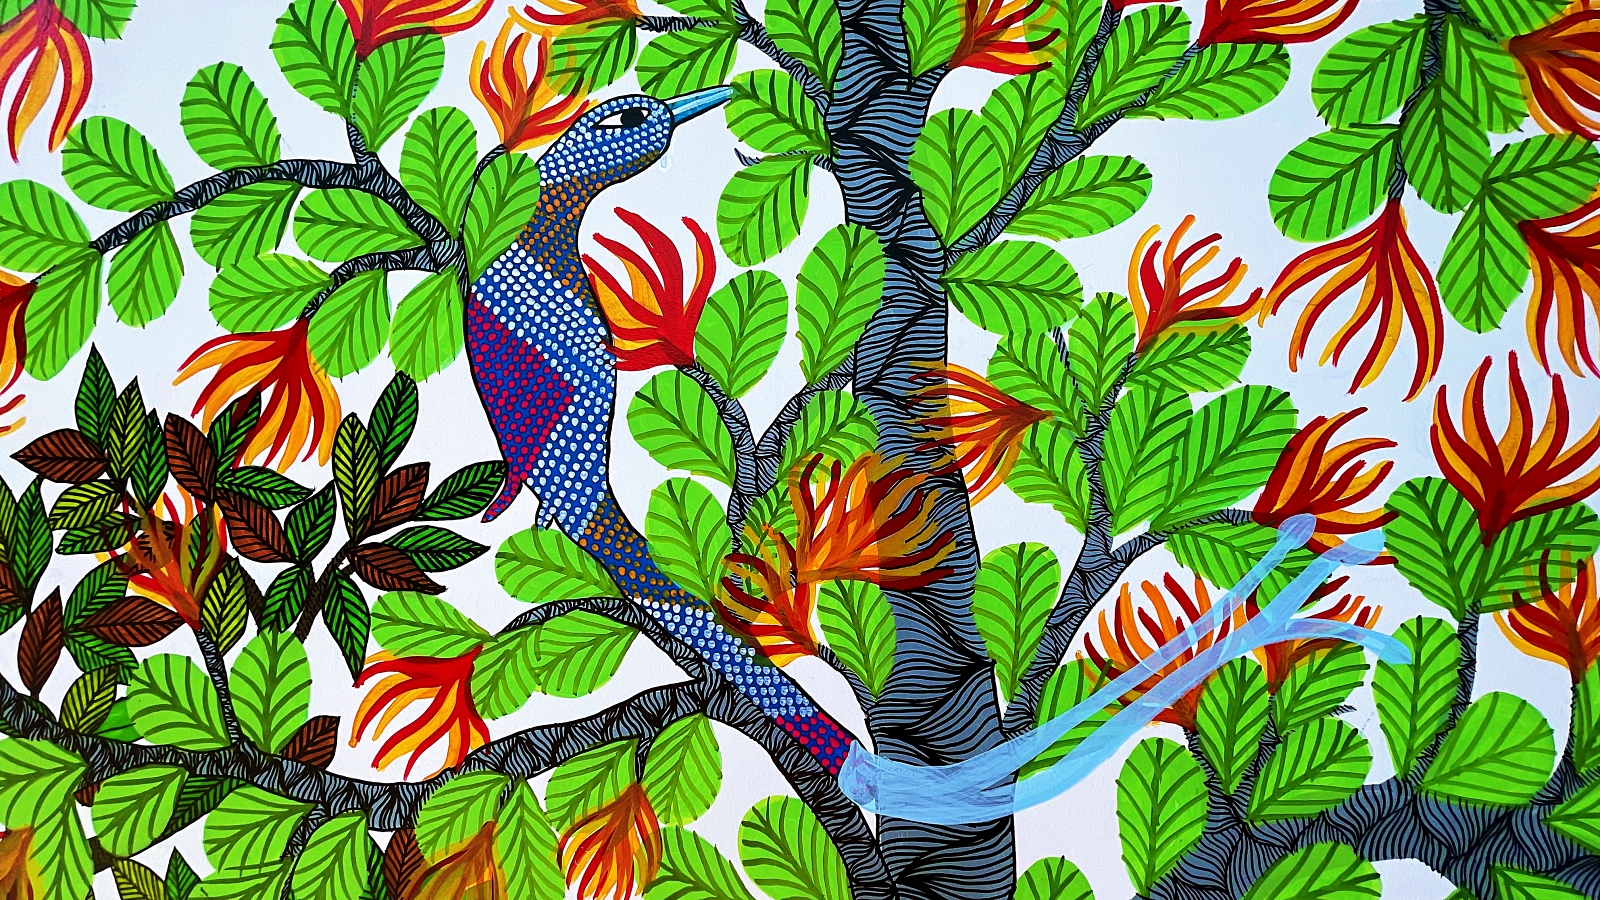 Painting With a Purpose: The Influences Behind Bhil & Gond Art